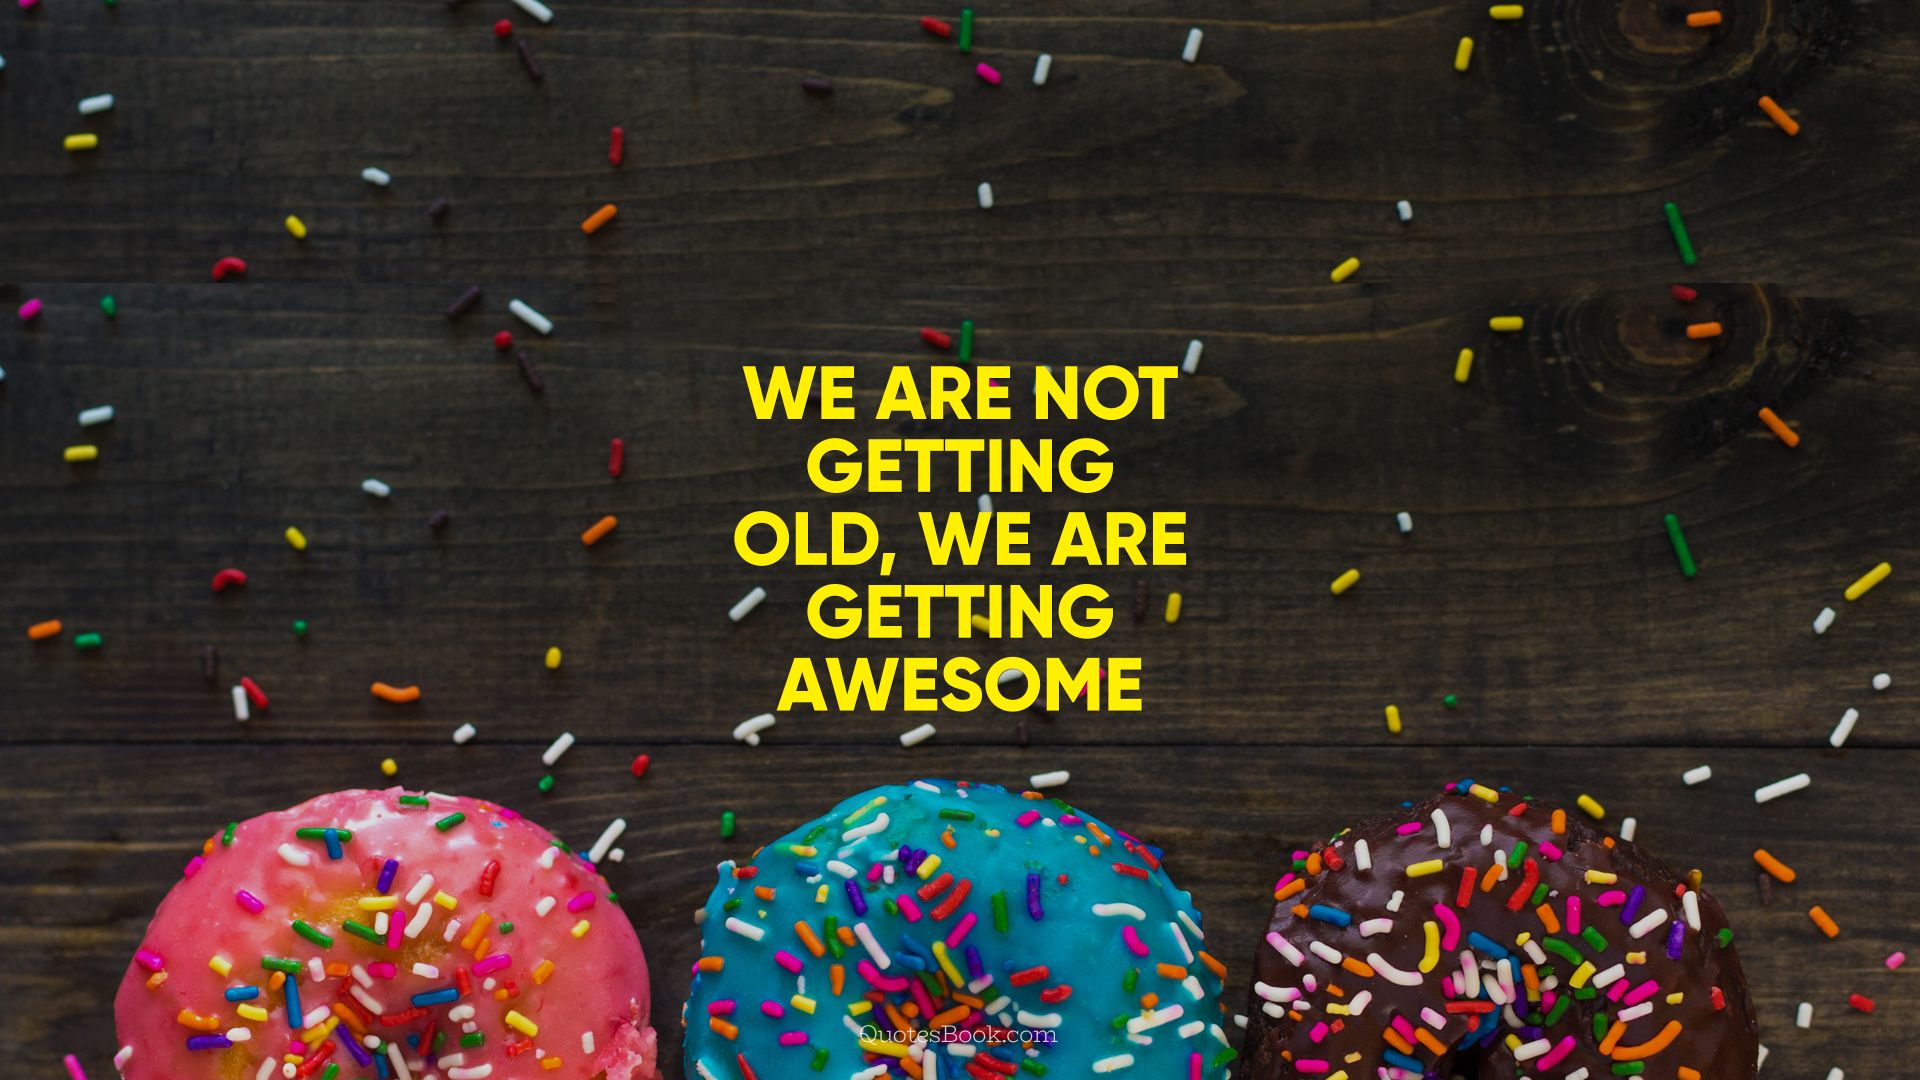 We are not getting old, we are getting awesome. - Quote by 